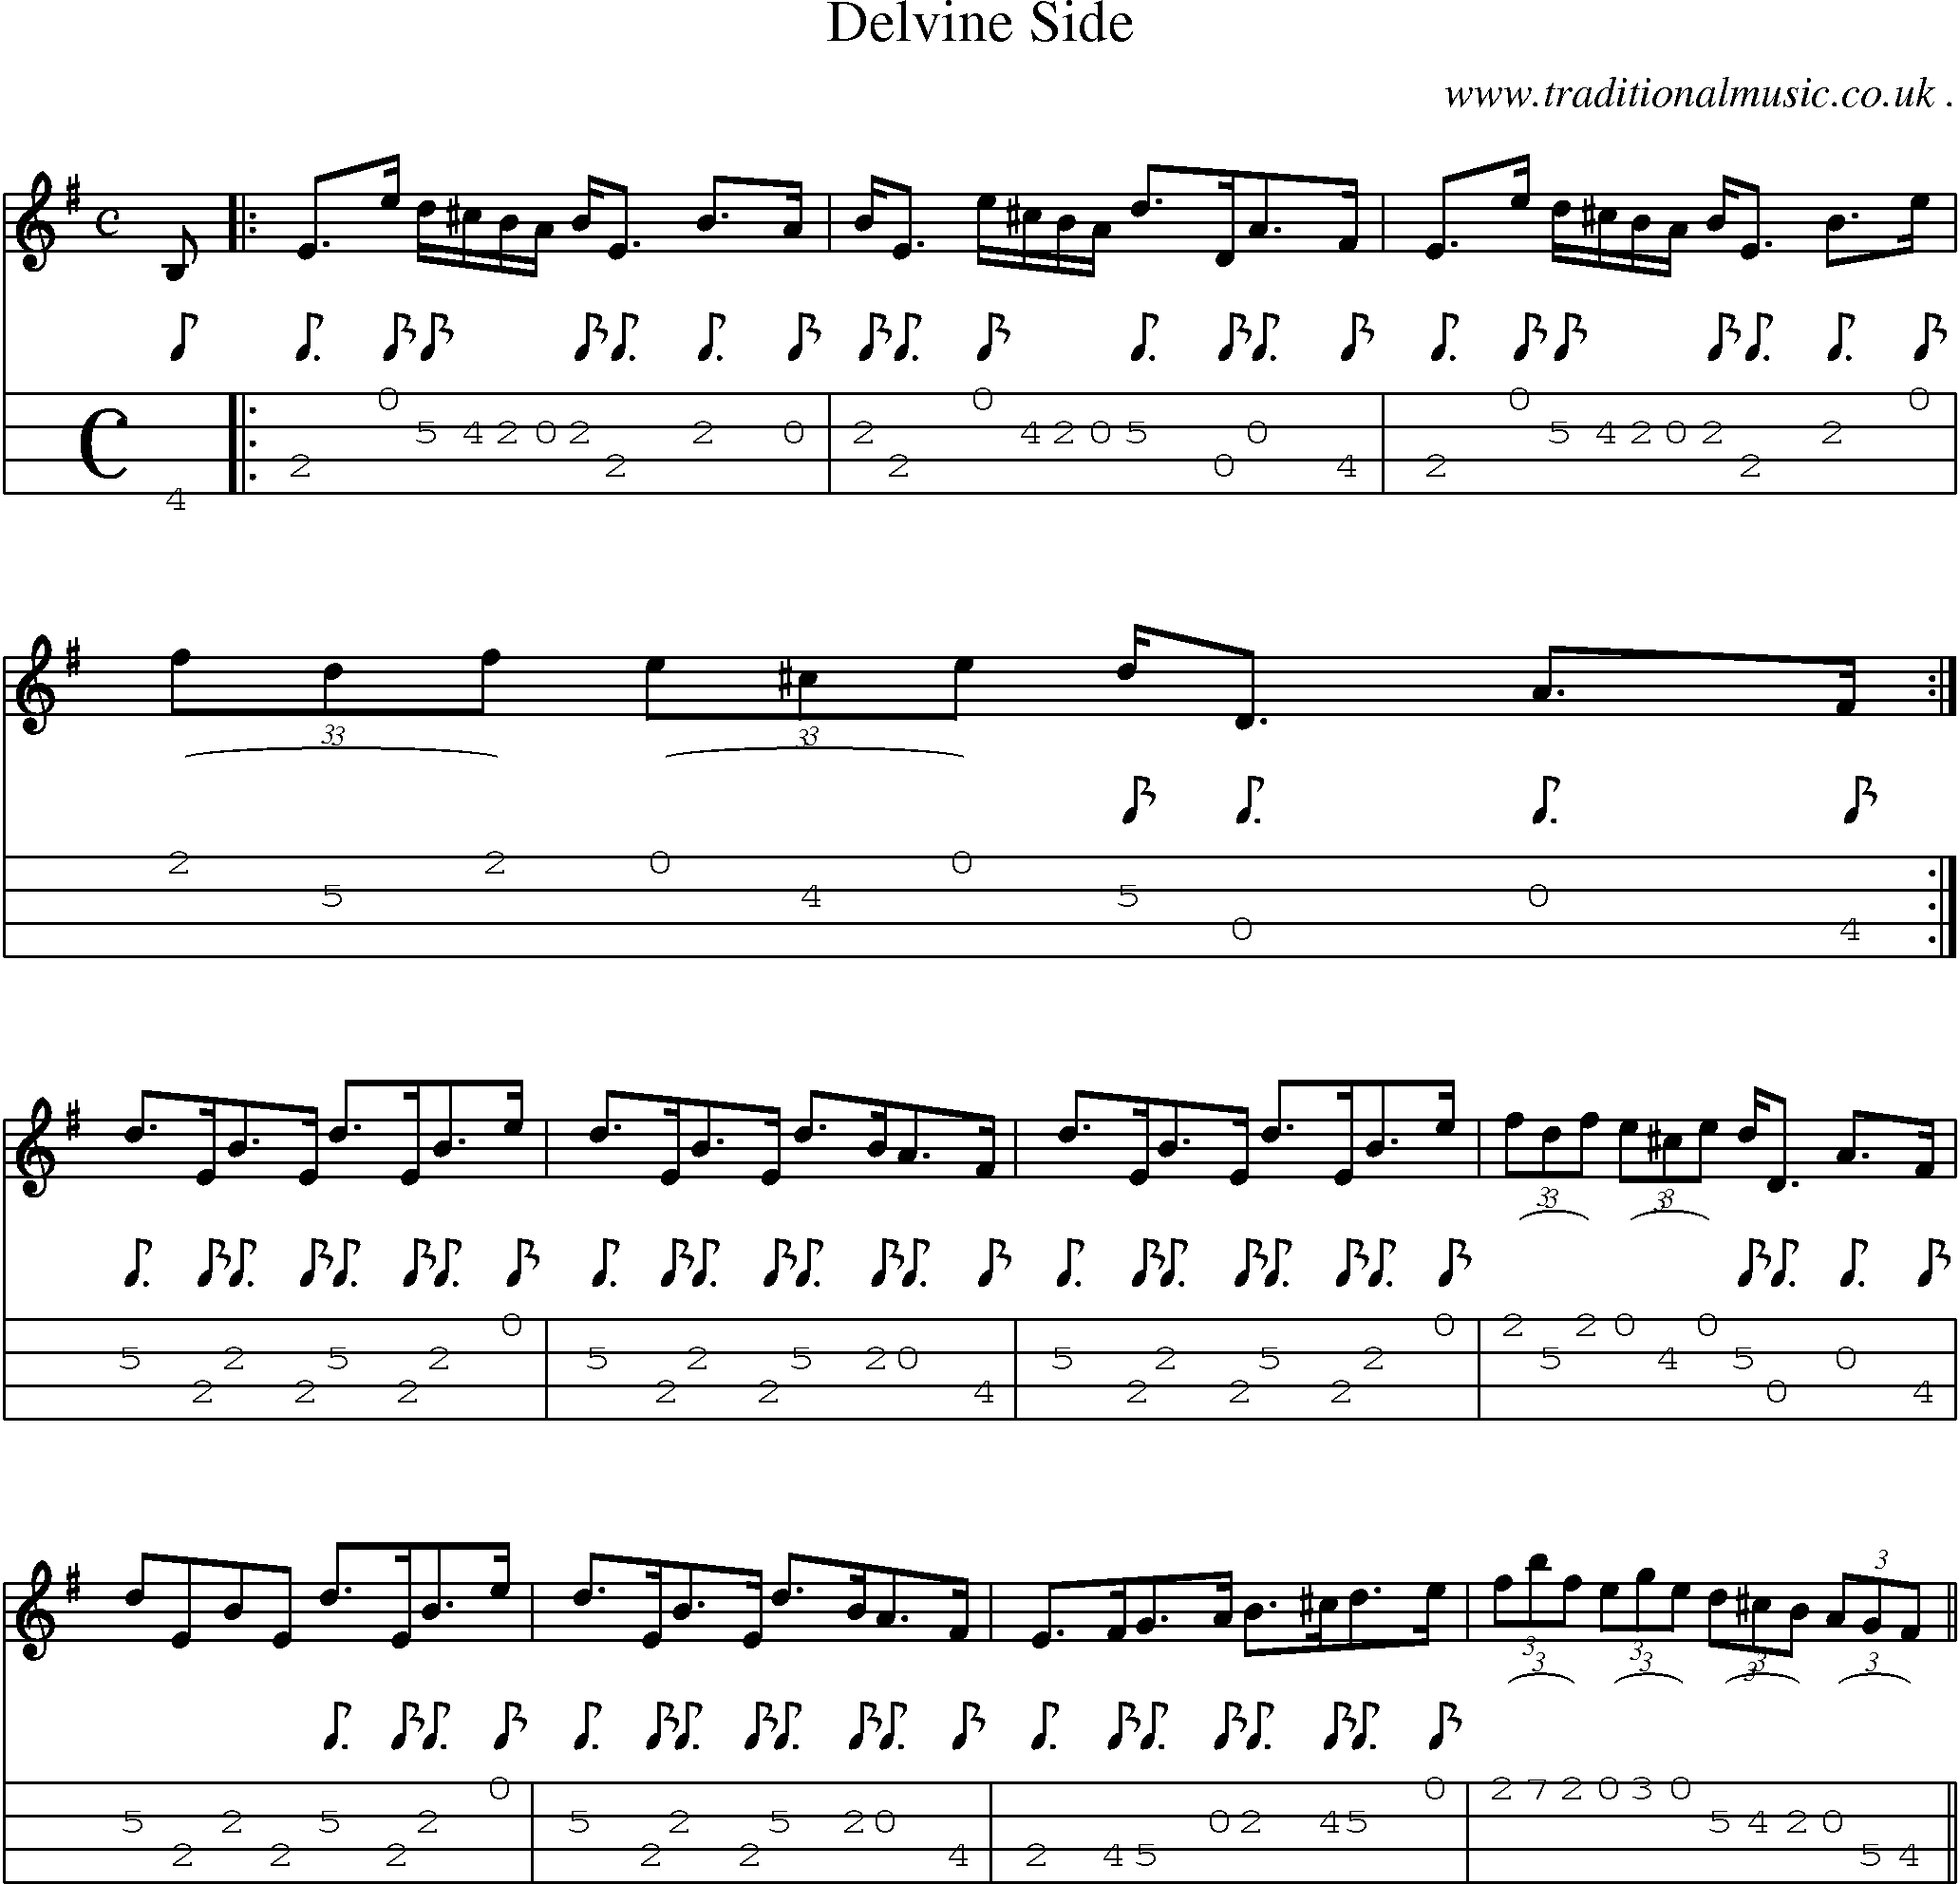 Sheet-music  score, Chords and Mandolin Tabs for Delvine Side